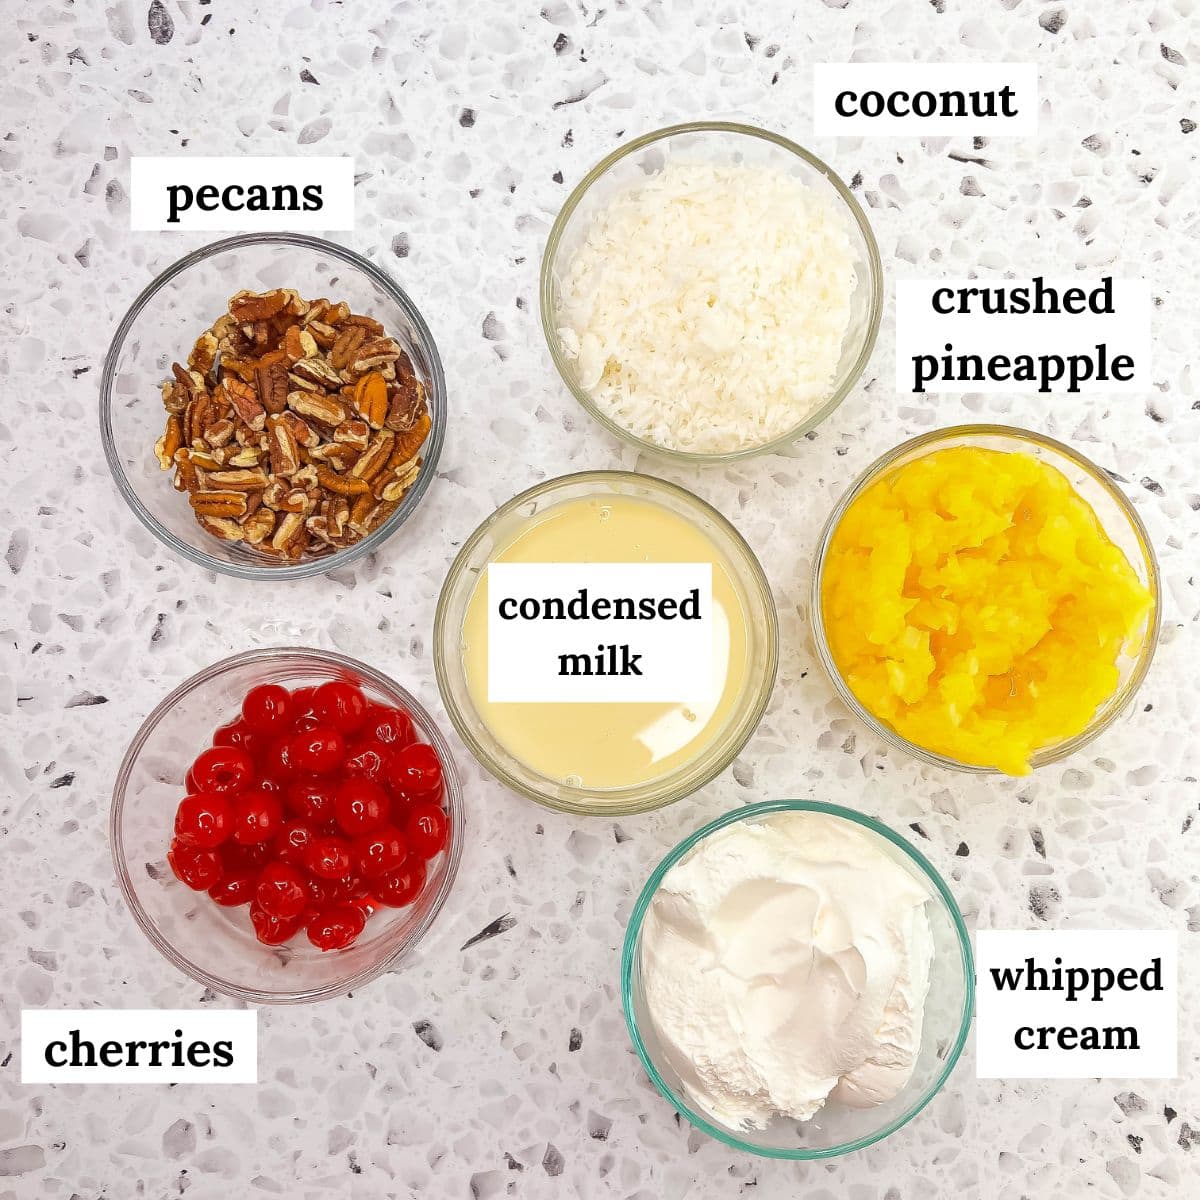 Ingredients premeasured in a small bowls.